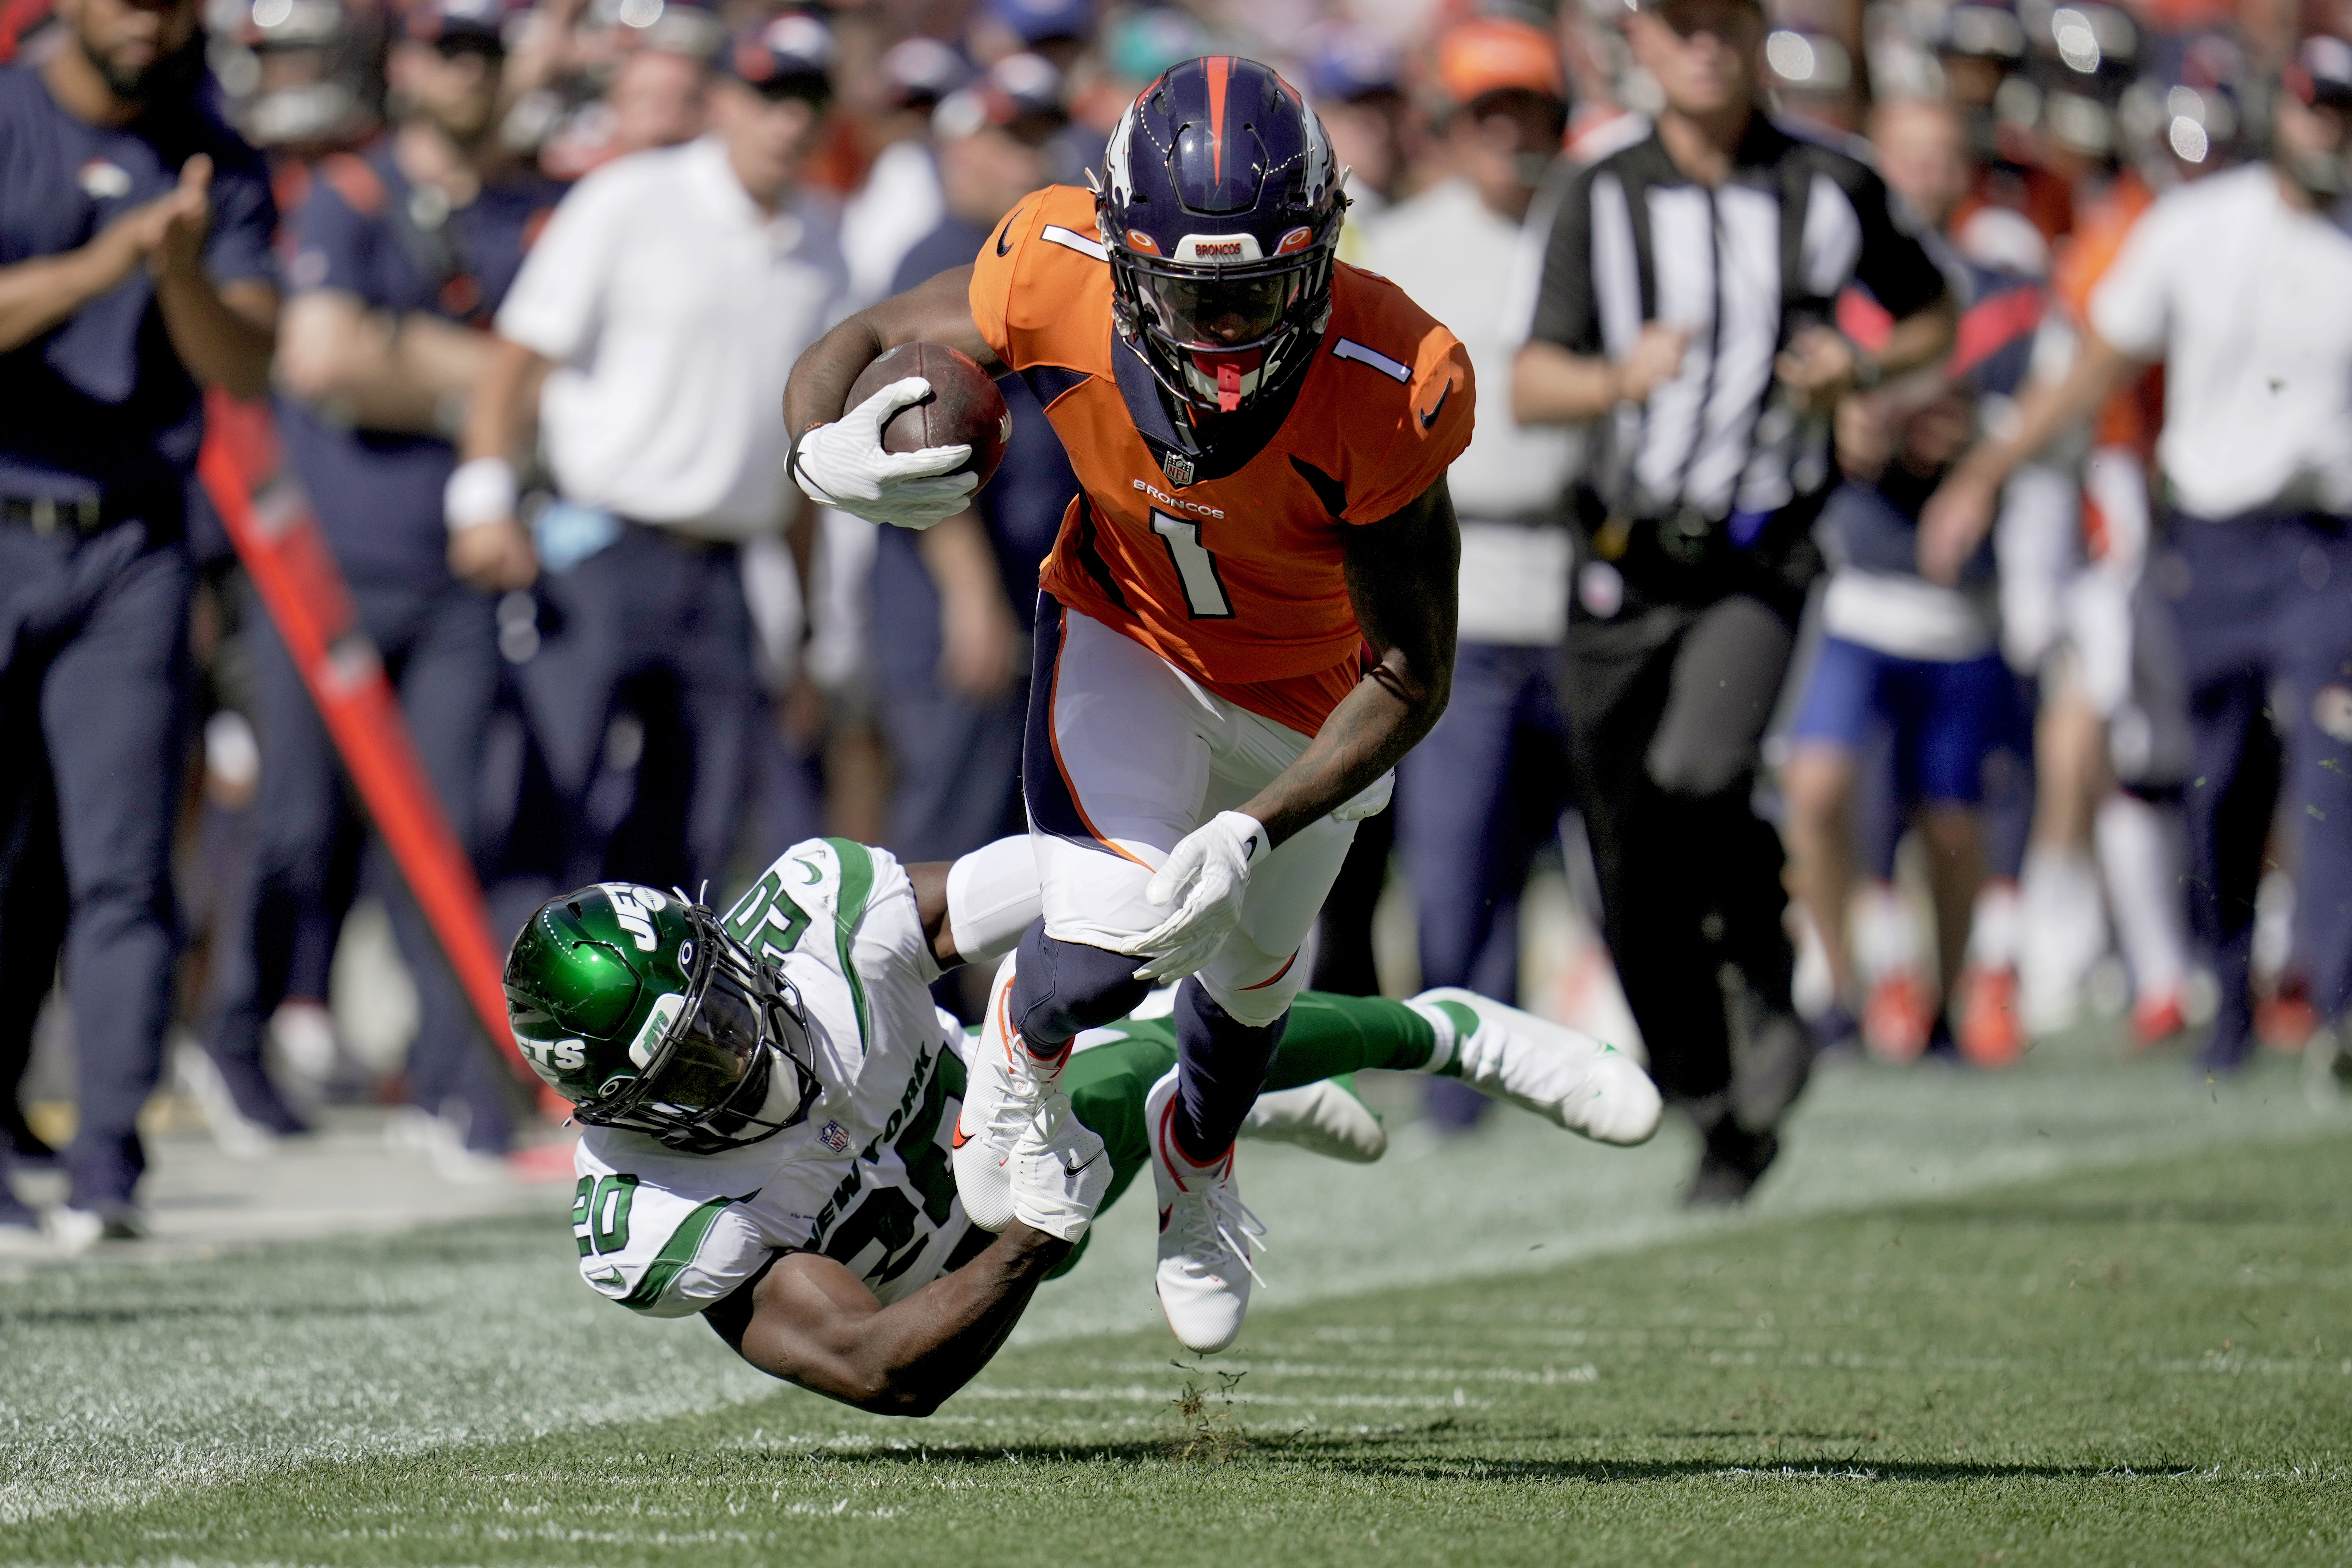 Report: Broncos' KJ Hamler Has Torn ACL; Out for Rest of Season